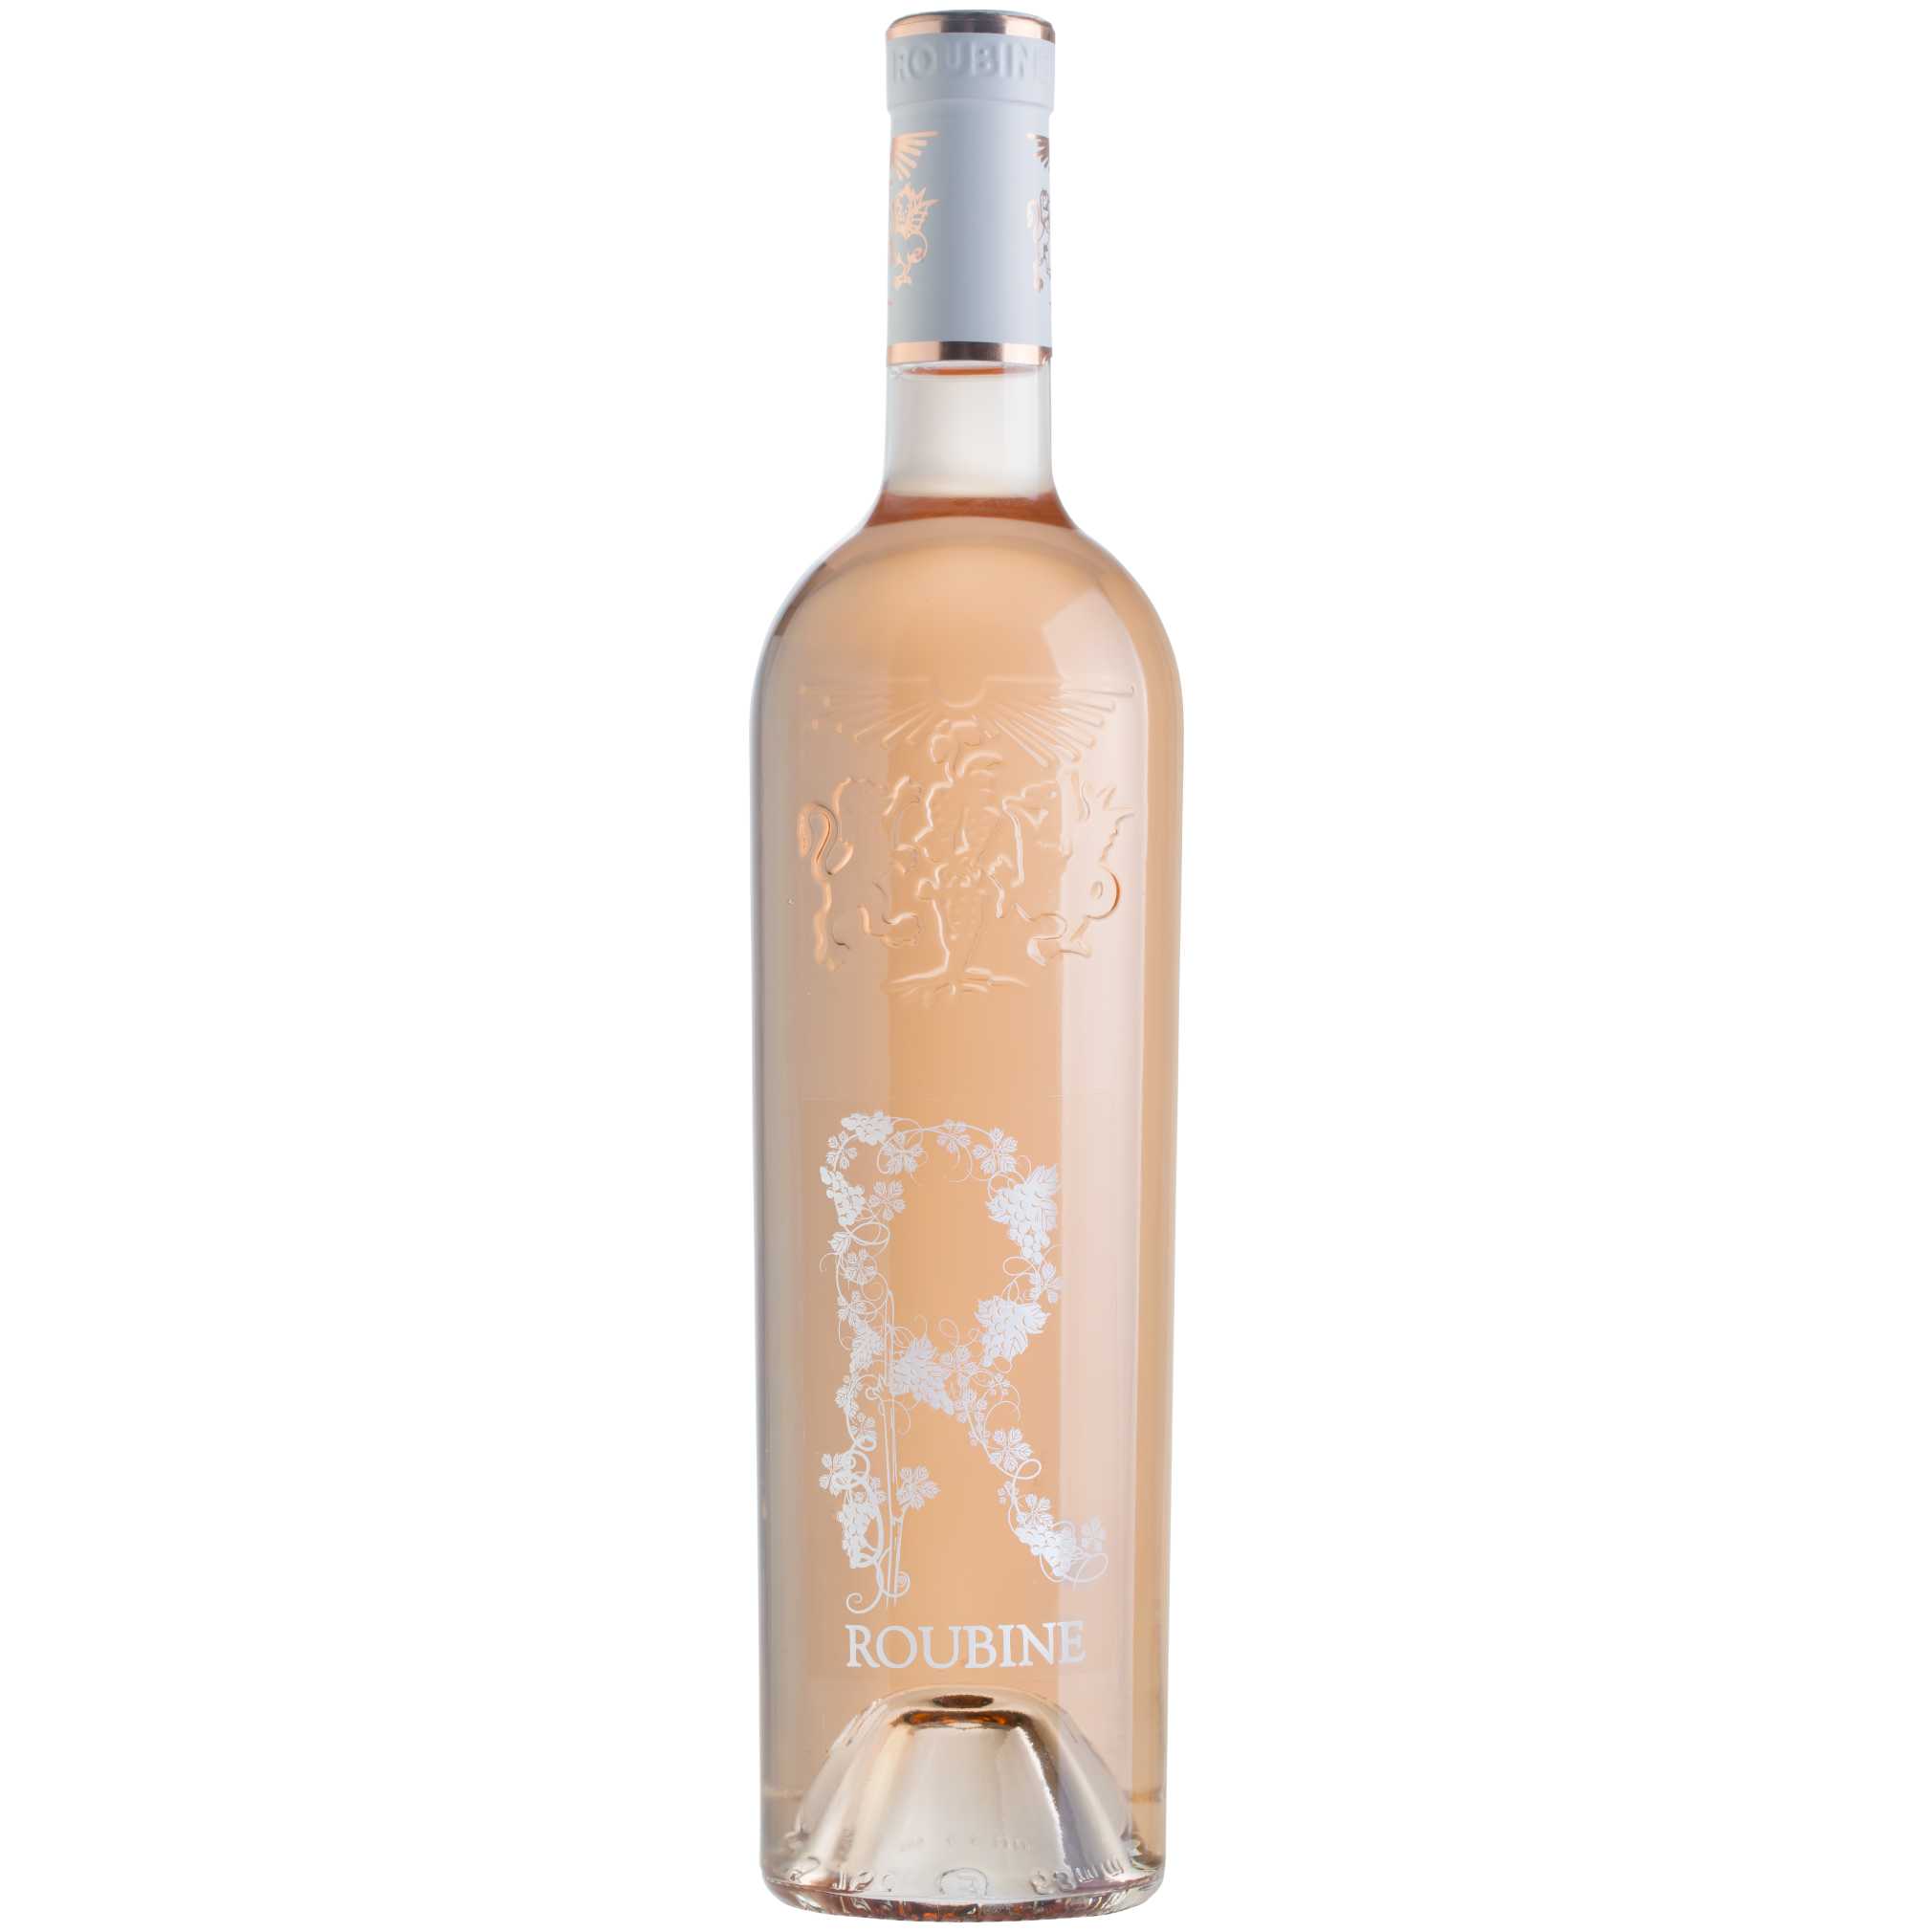 Chateau Roubine R De Roubine Rose - A Kosher Wine From France